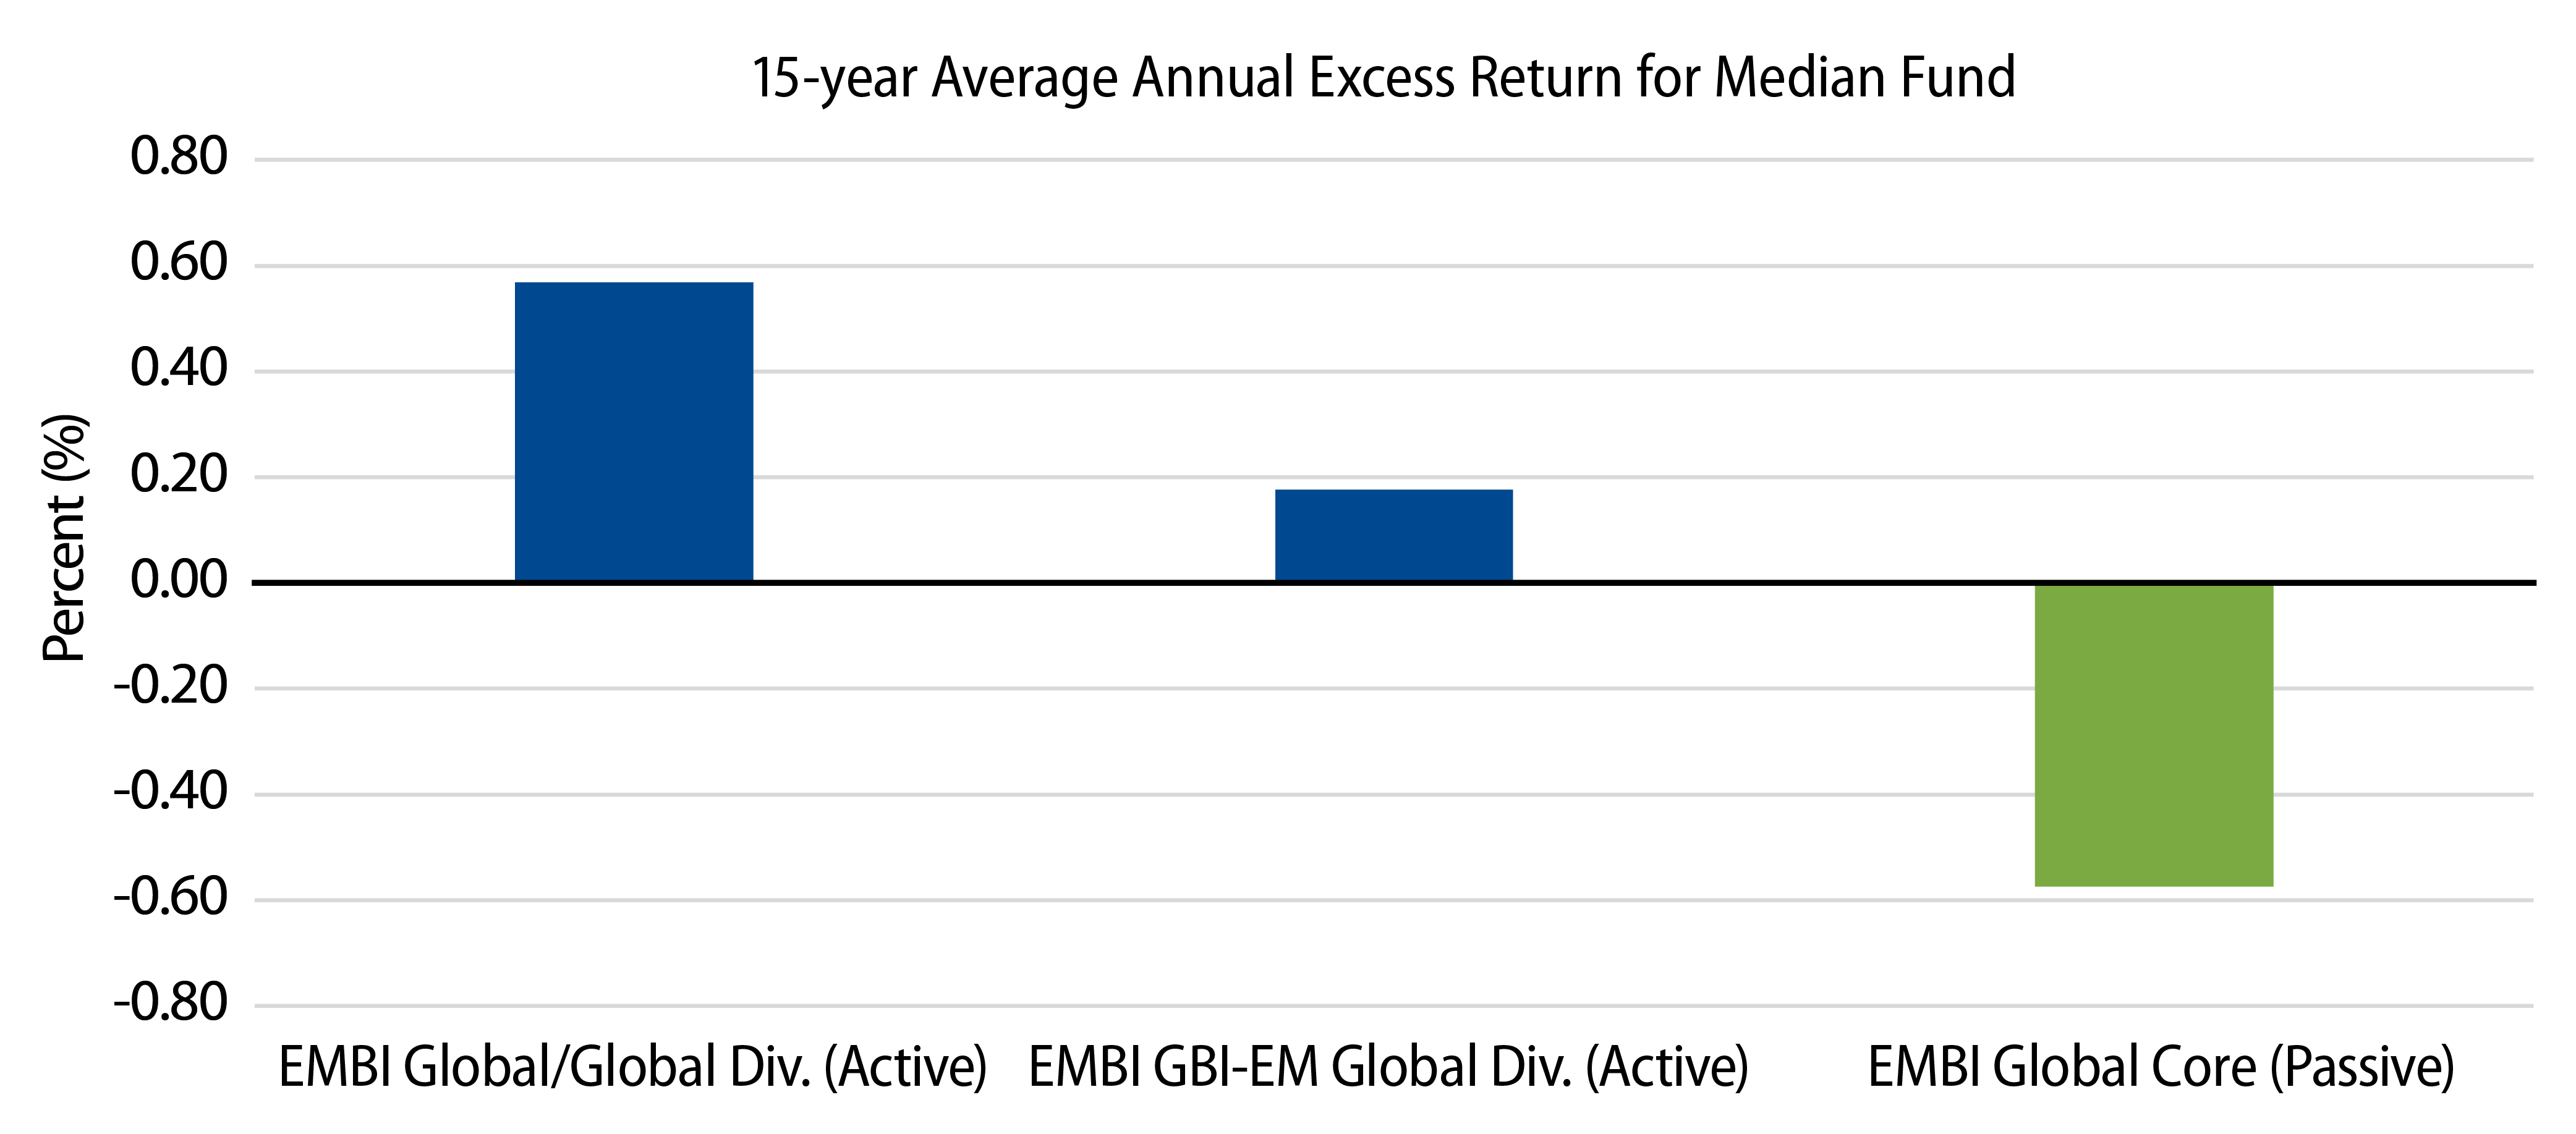 … Meanwhile, EM Passive Fund Performance Is Trailing